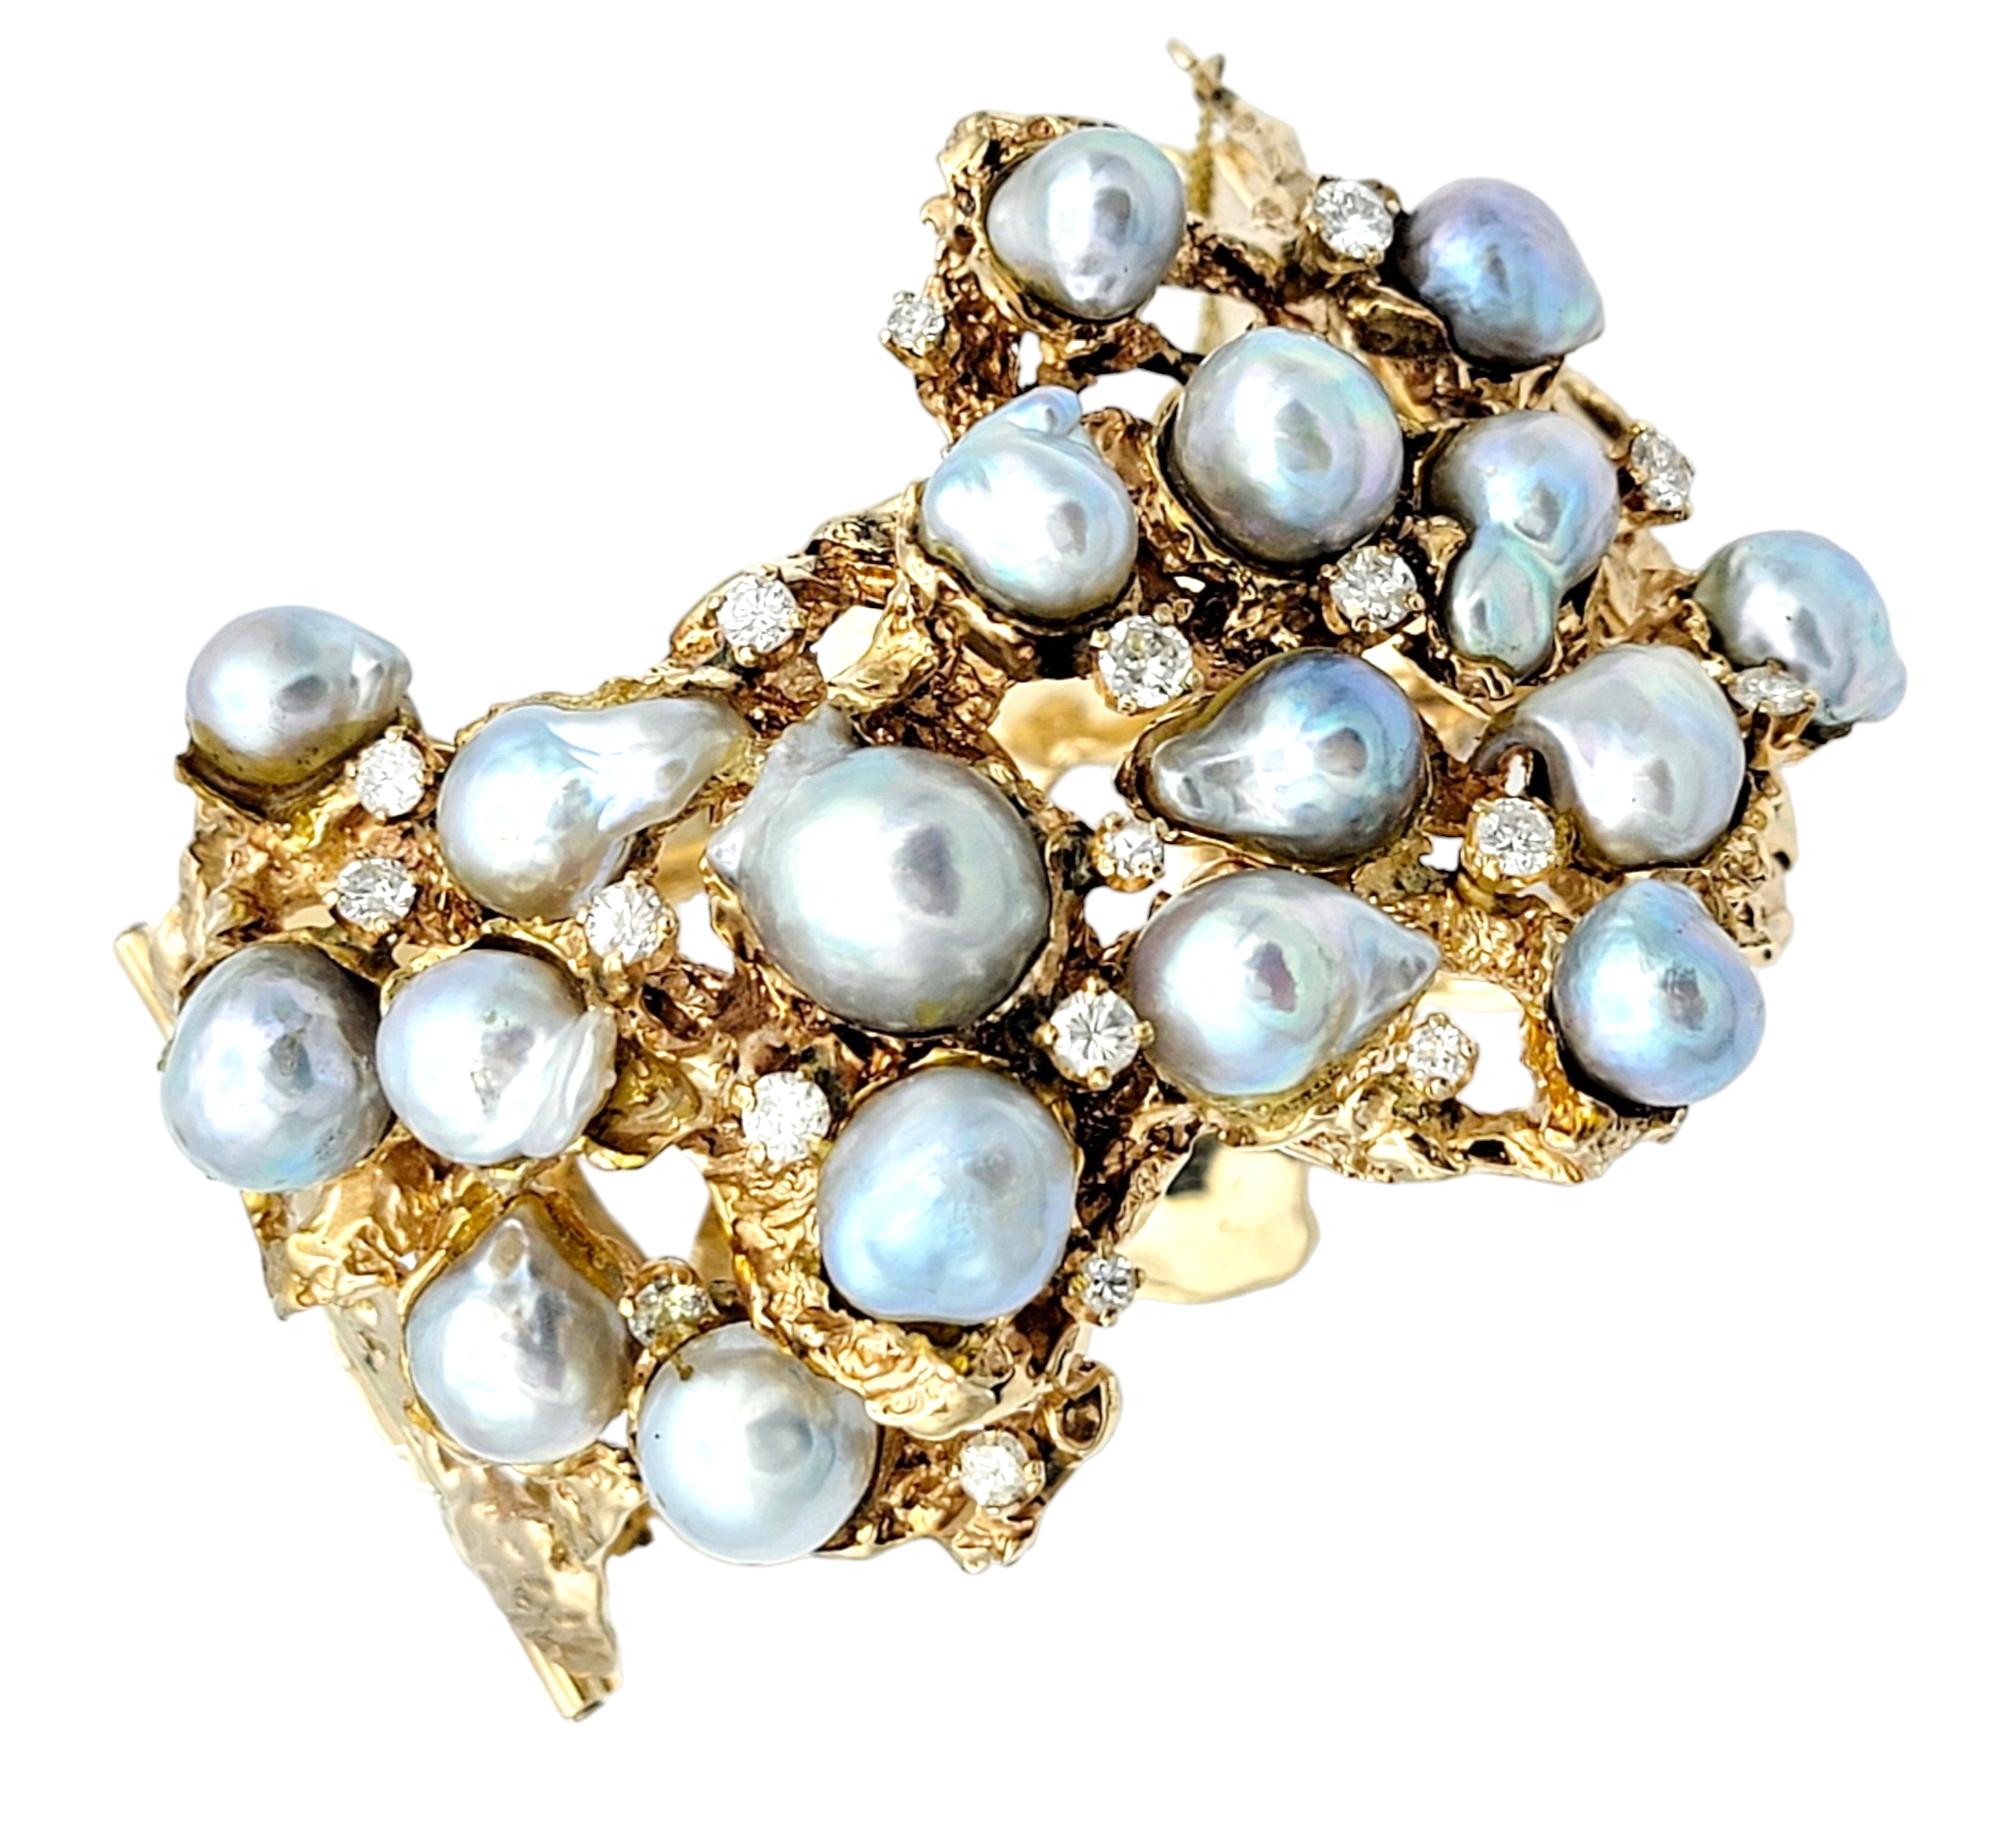 Contemporary Vintage Arthur King Baroque Pearl and Diamond 14 Karat Yellow Gold Cuff Bracelet For Sale